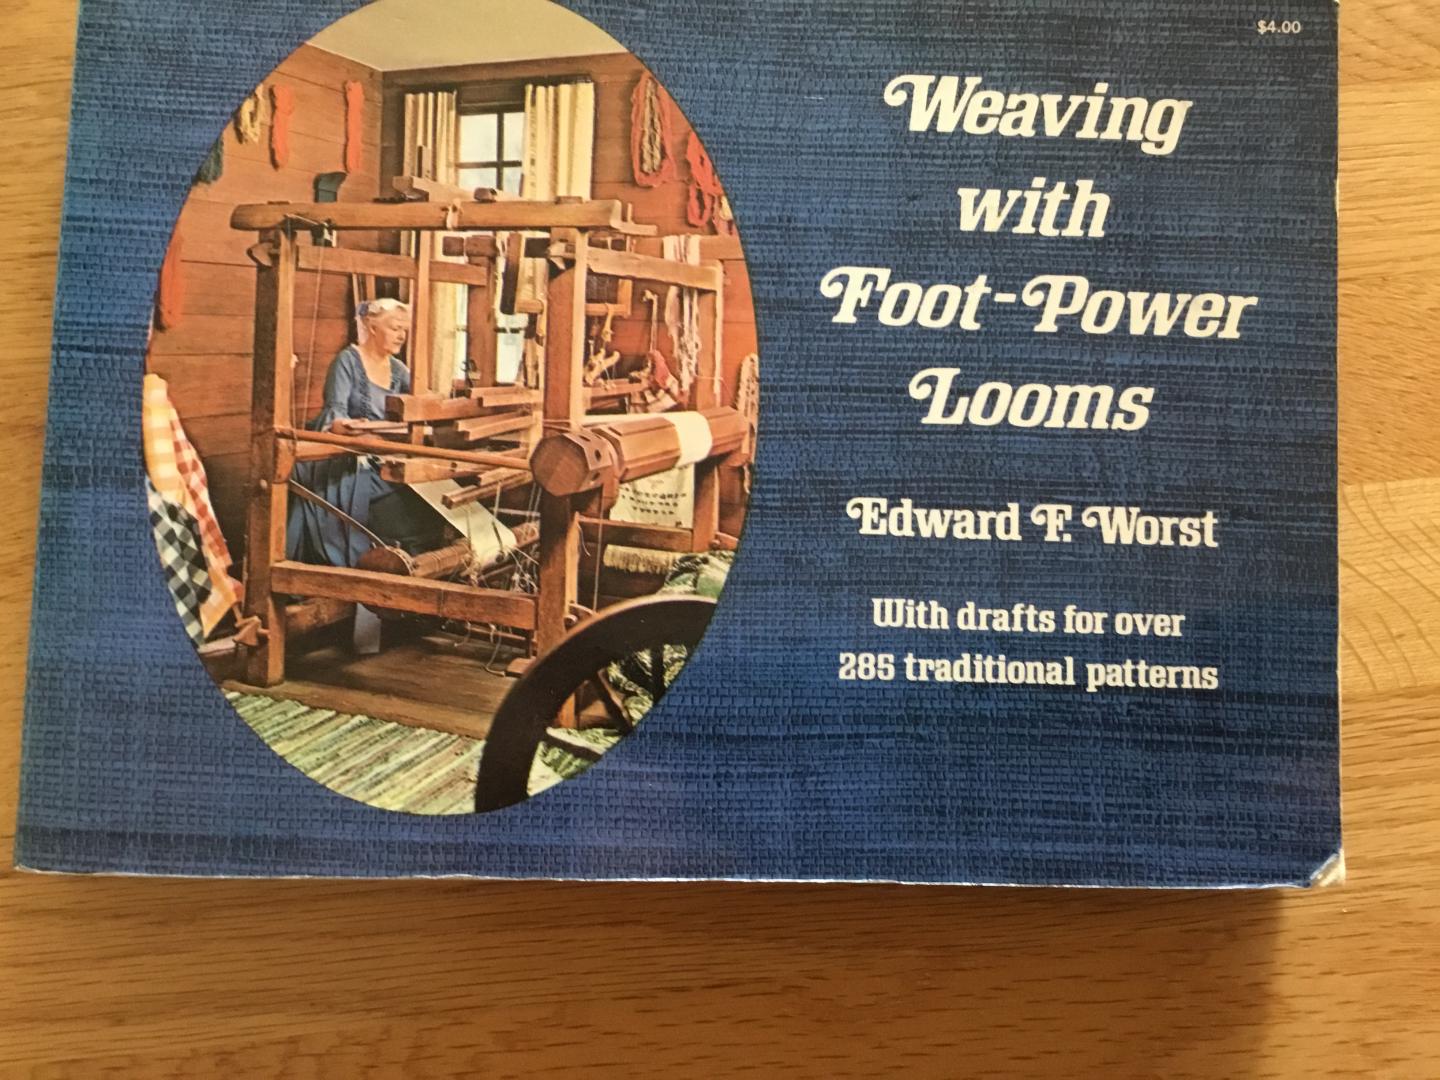 Worst Edward F. - Weaving with foot-power looms